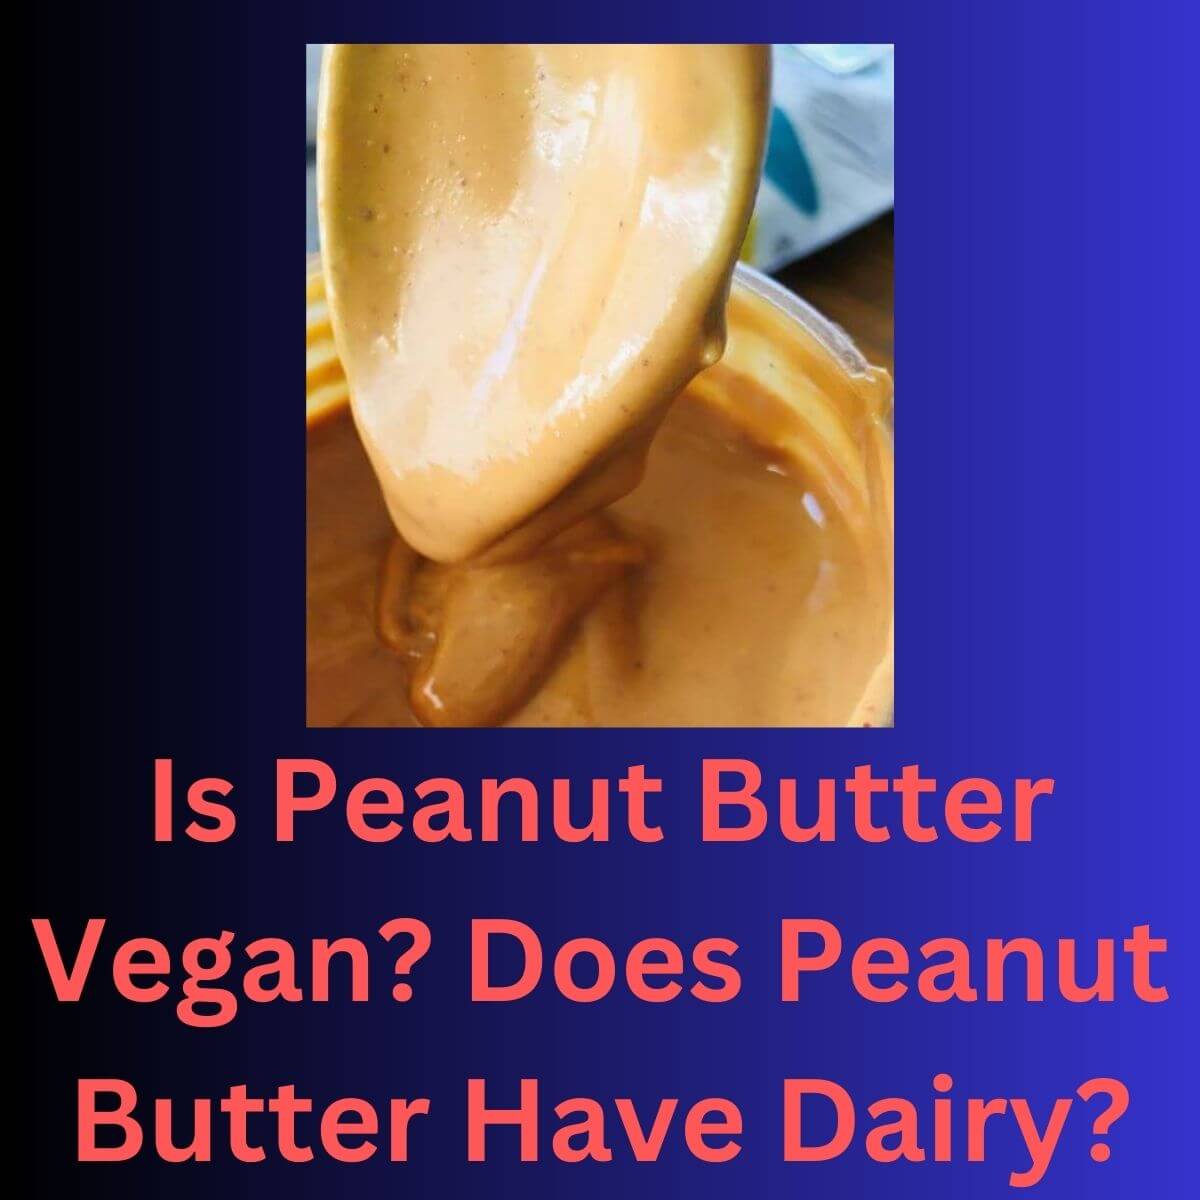 picture of a spoon dipped in peanut butter. Text reads: Is peanut butter vegan? Does peanut butter have dairy?